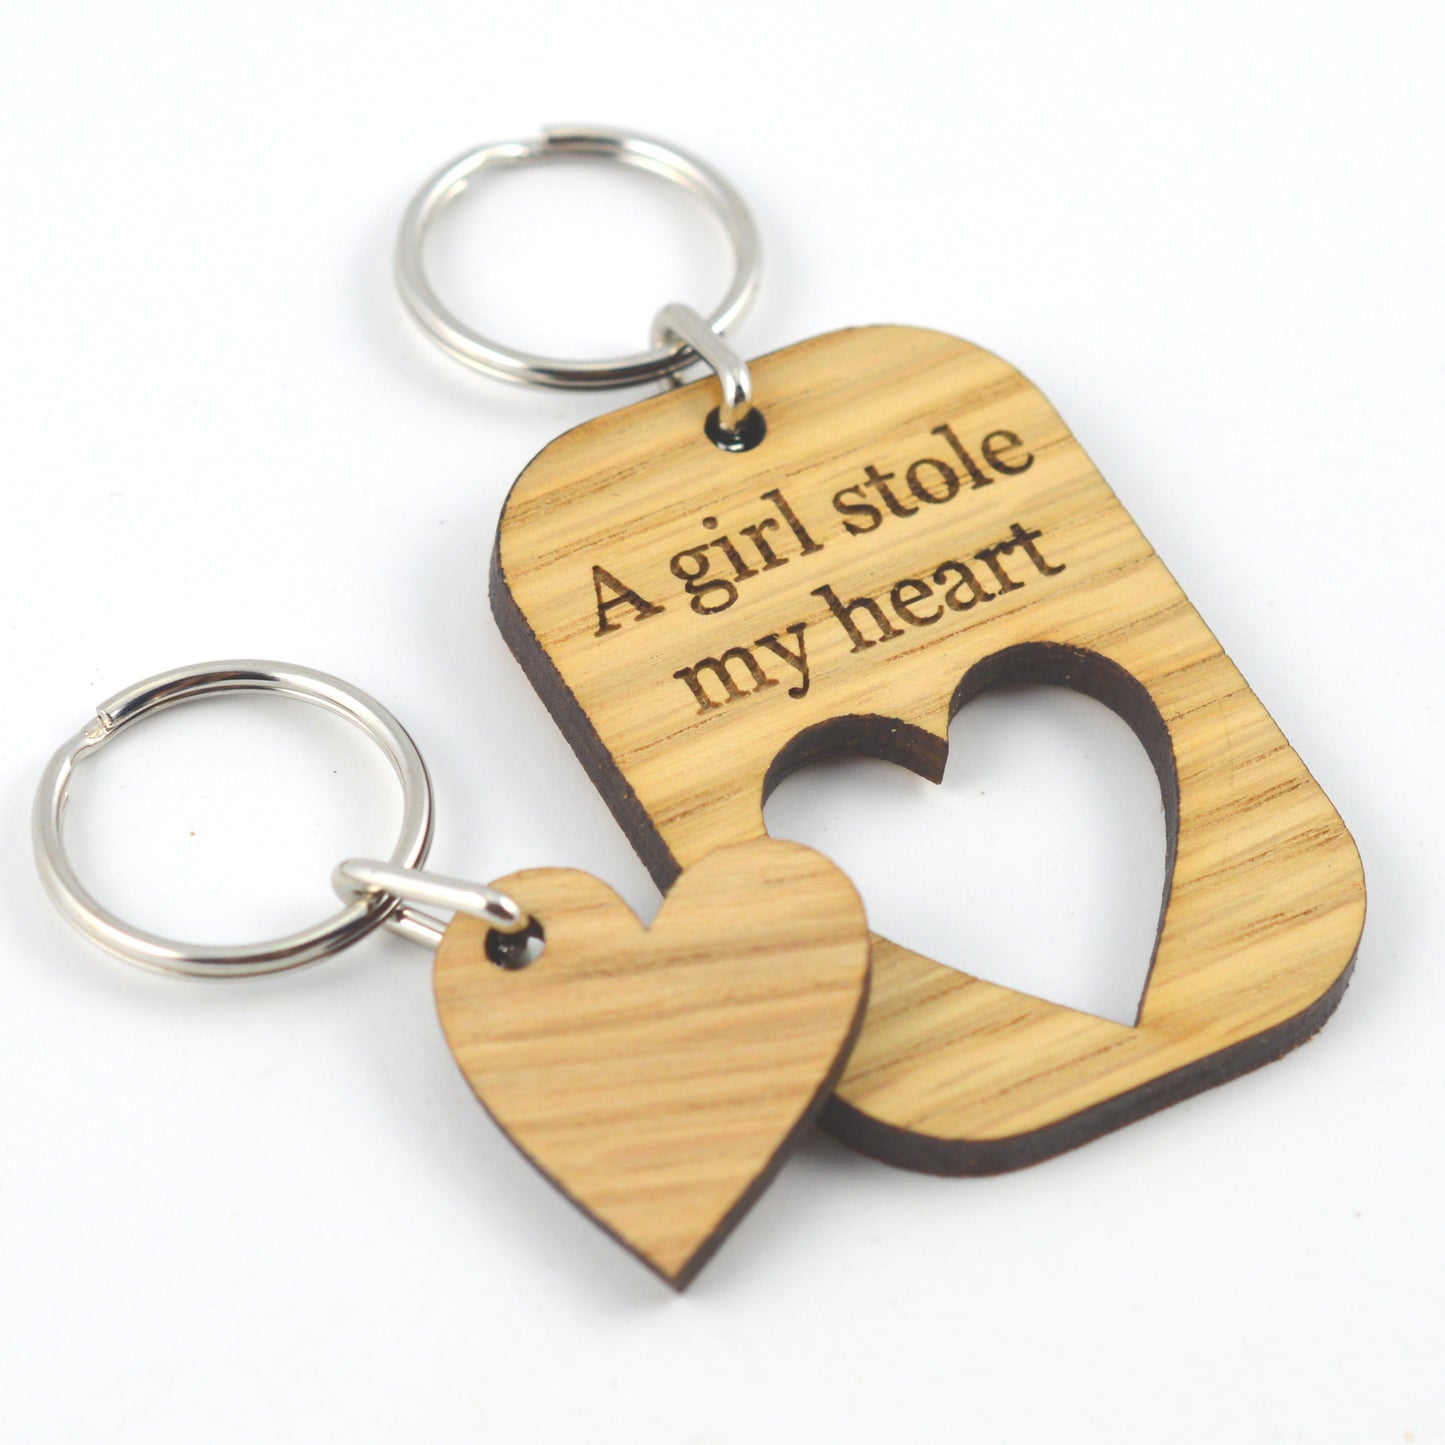 A GIRL Stole My HEART - Valentines Day Keyring Set Gift For Girlfriend / Wife